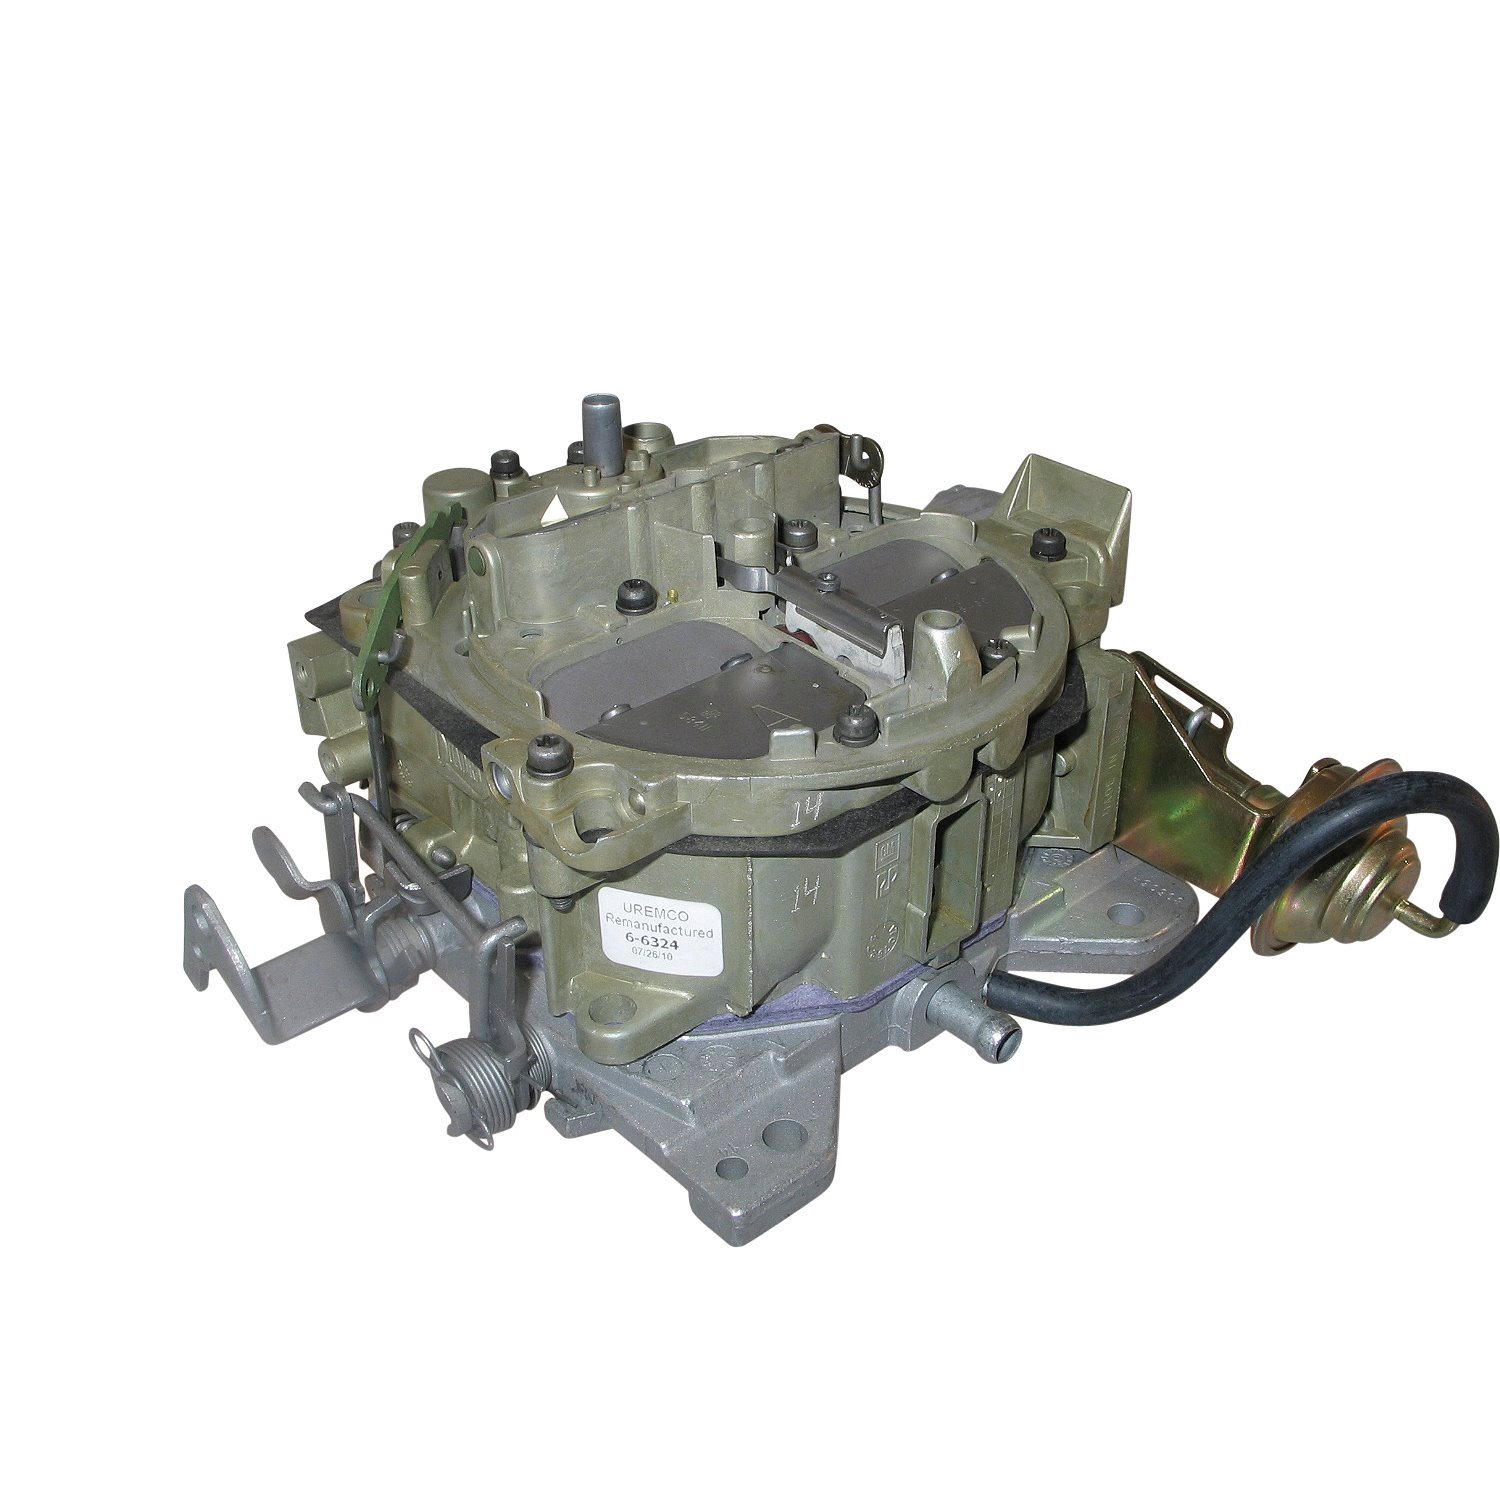 6-6324 Rochester Remanufactured Carburetor, M4ME, Light Duty-Style